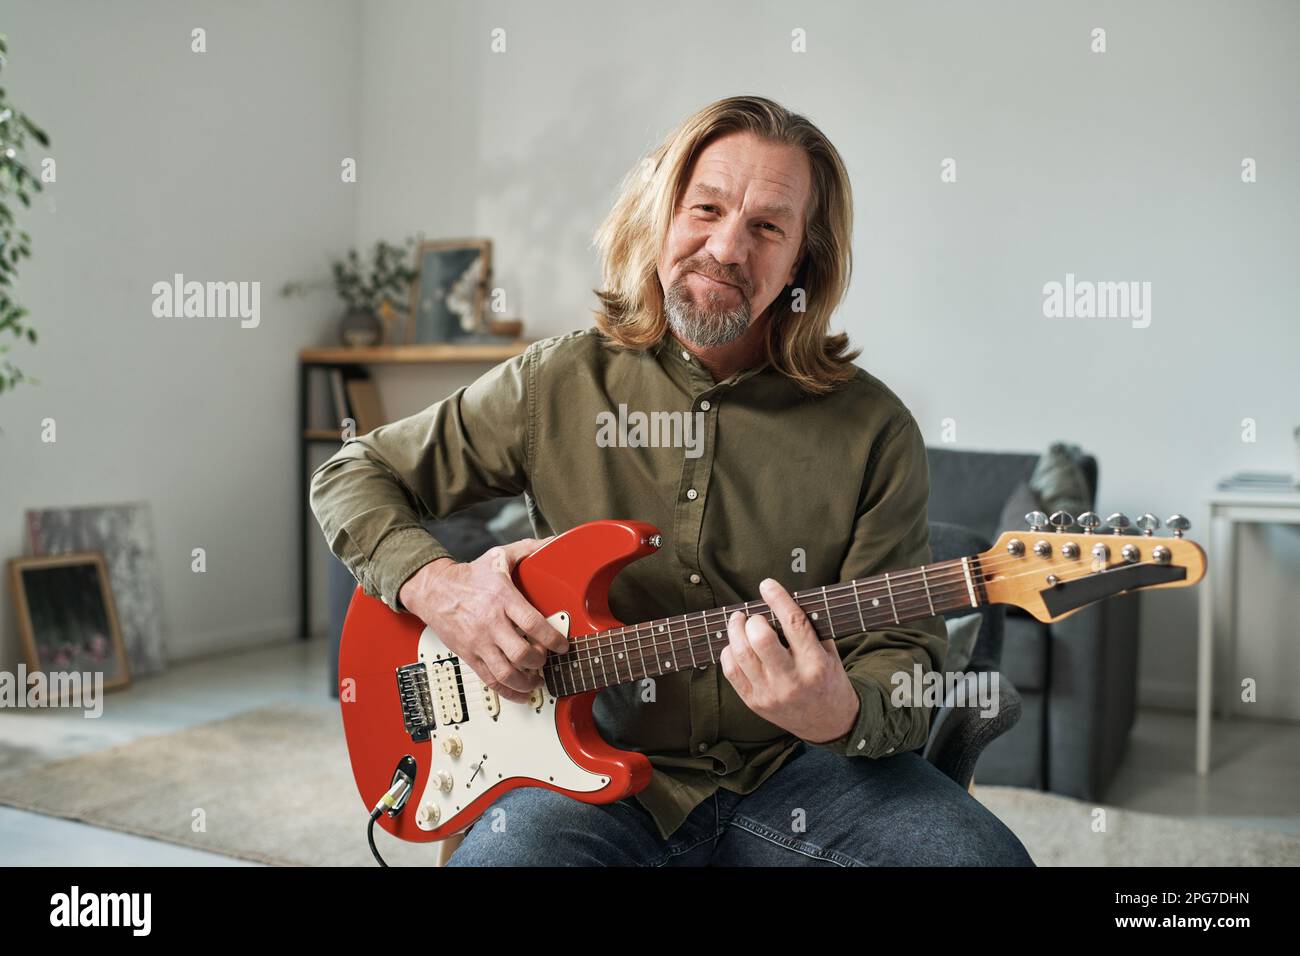 Portrait of mature guitarist with long hair looking at camera while playing guitar online Stock Photo